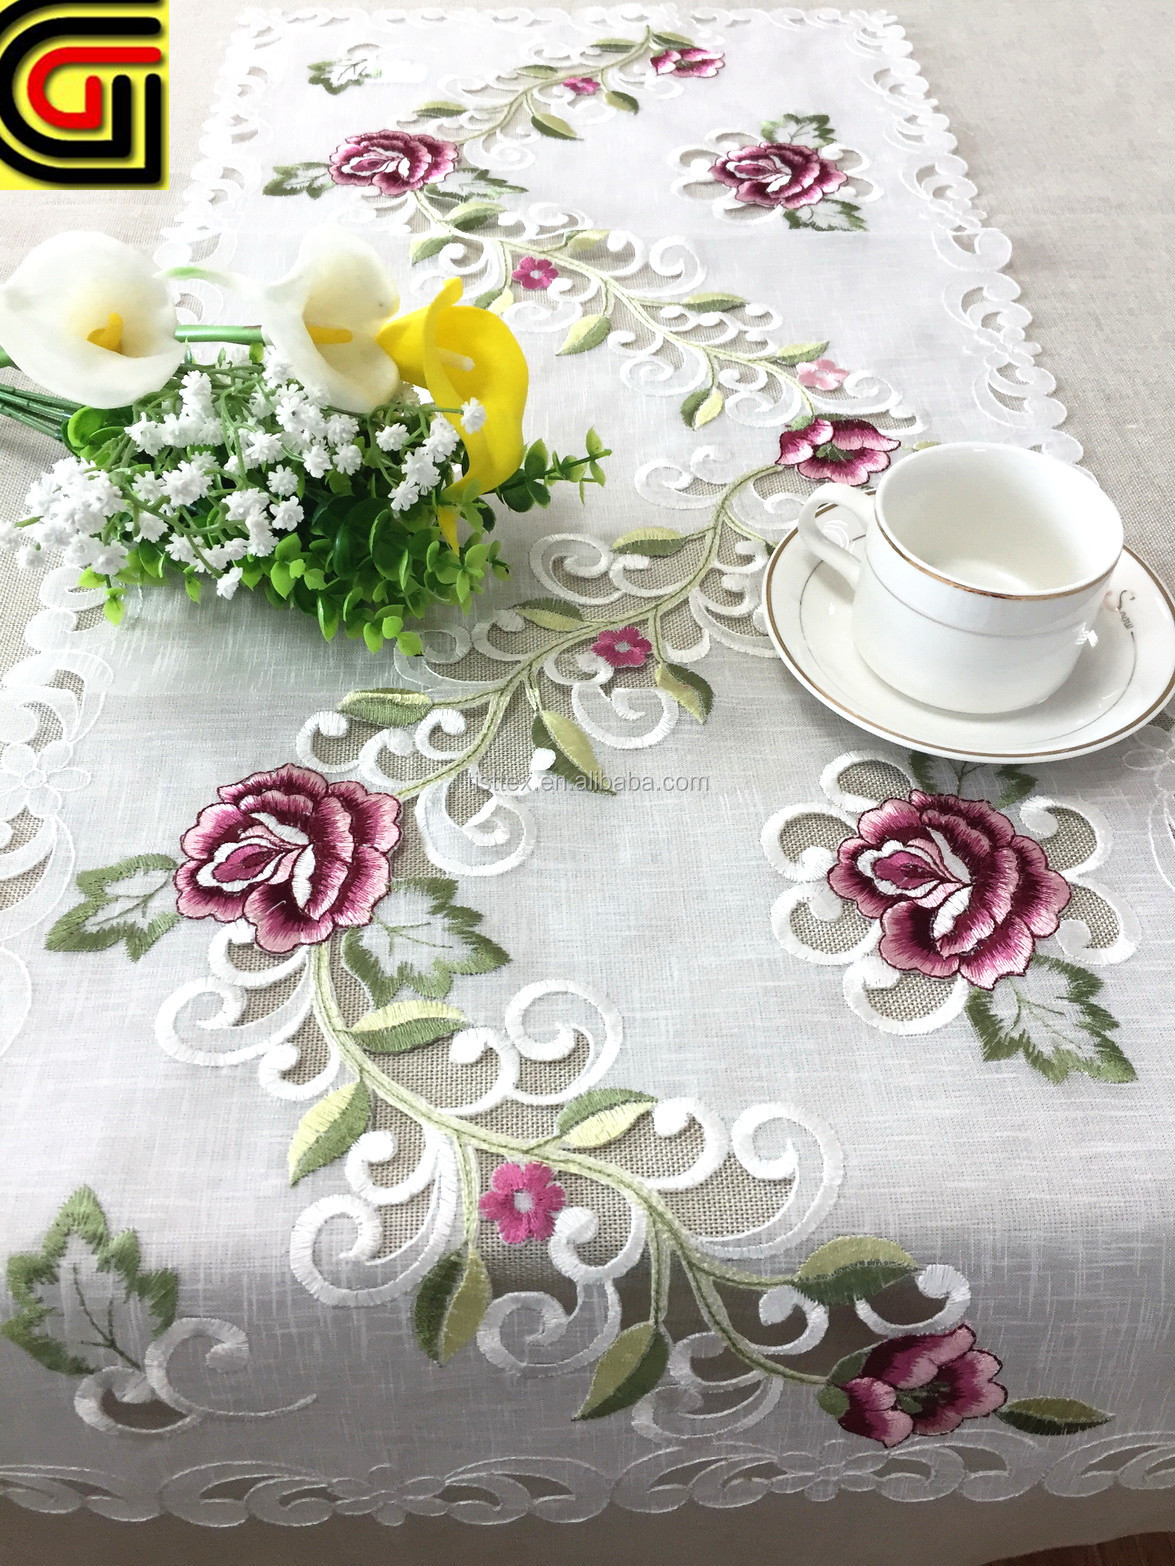 Organza fabric with embroidery table runner table cloth